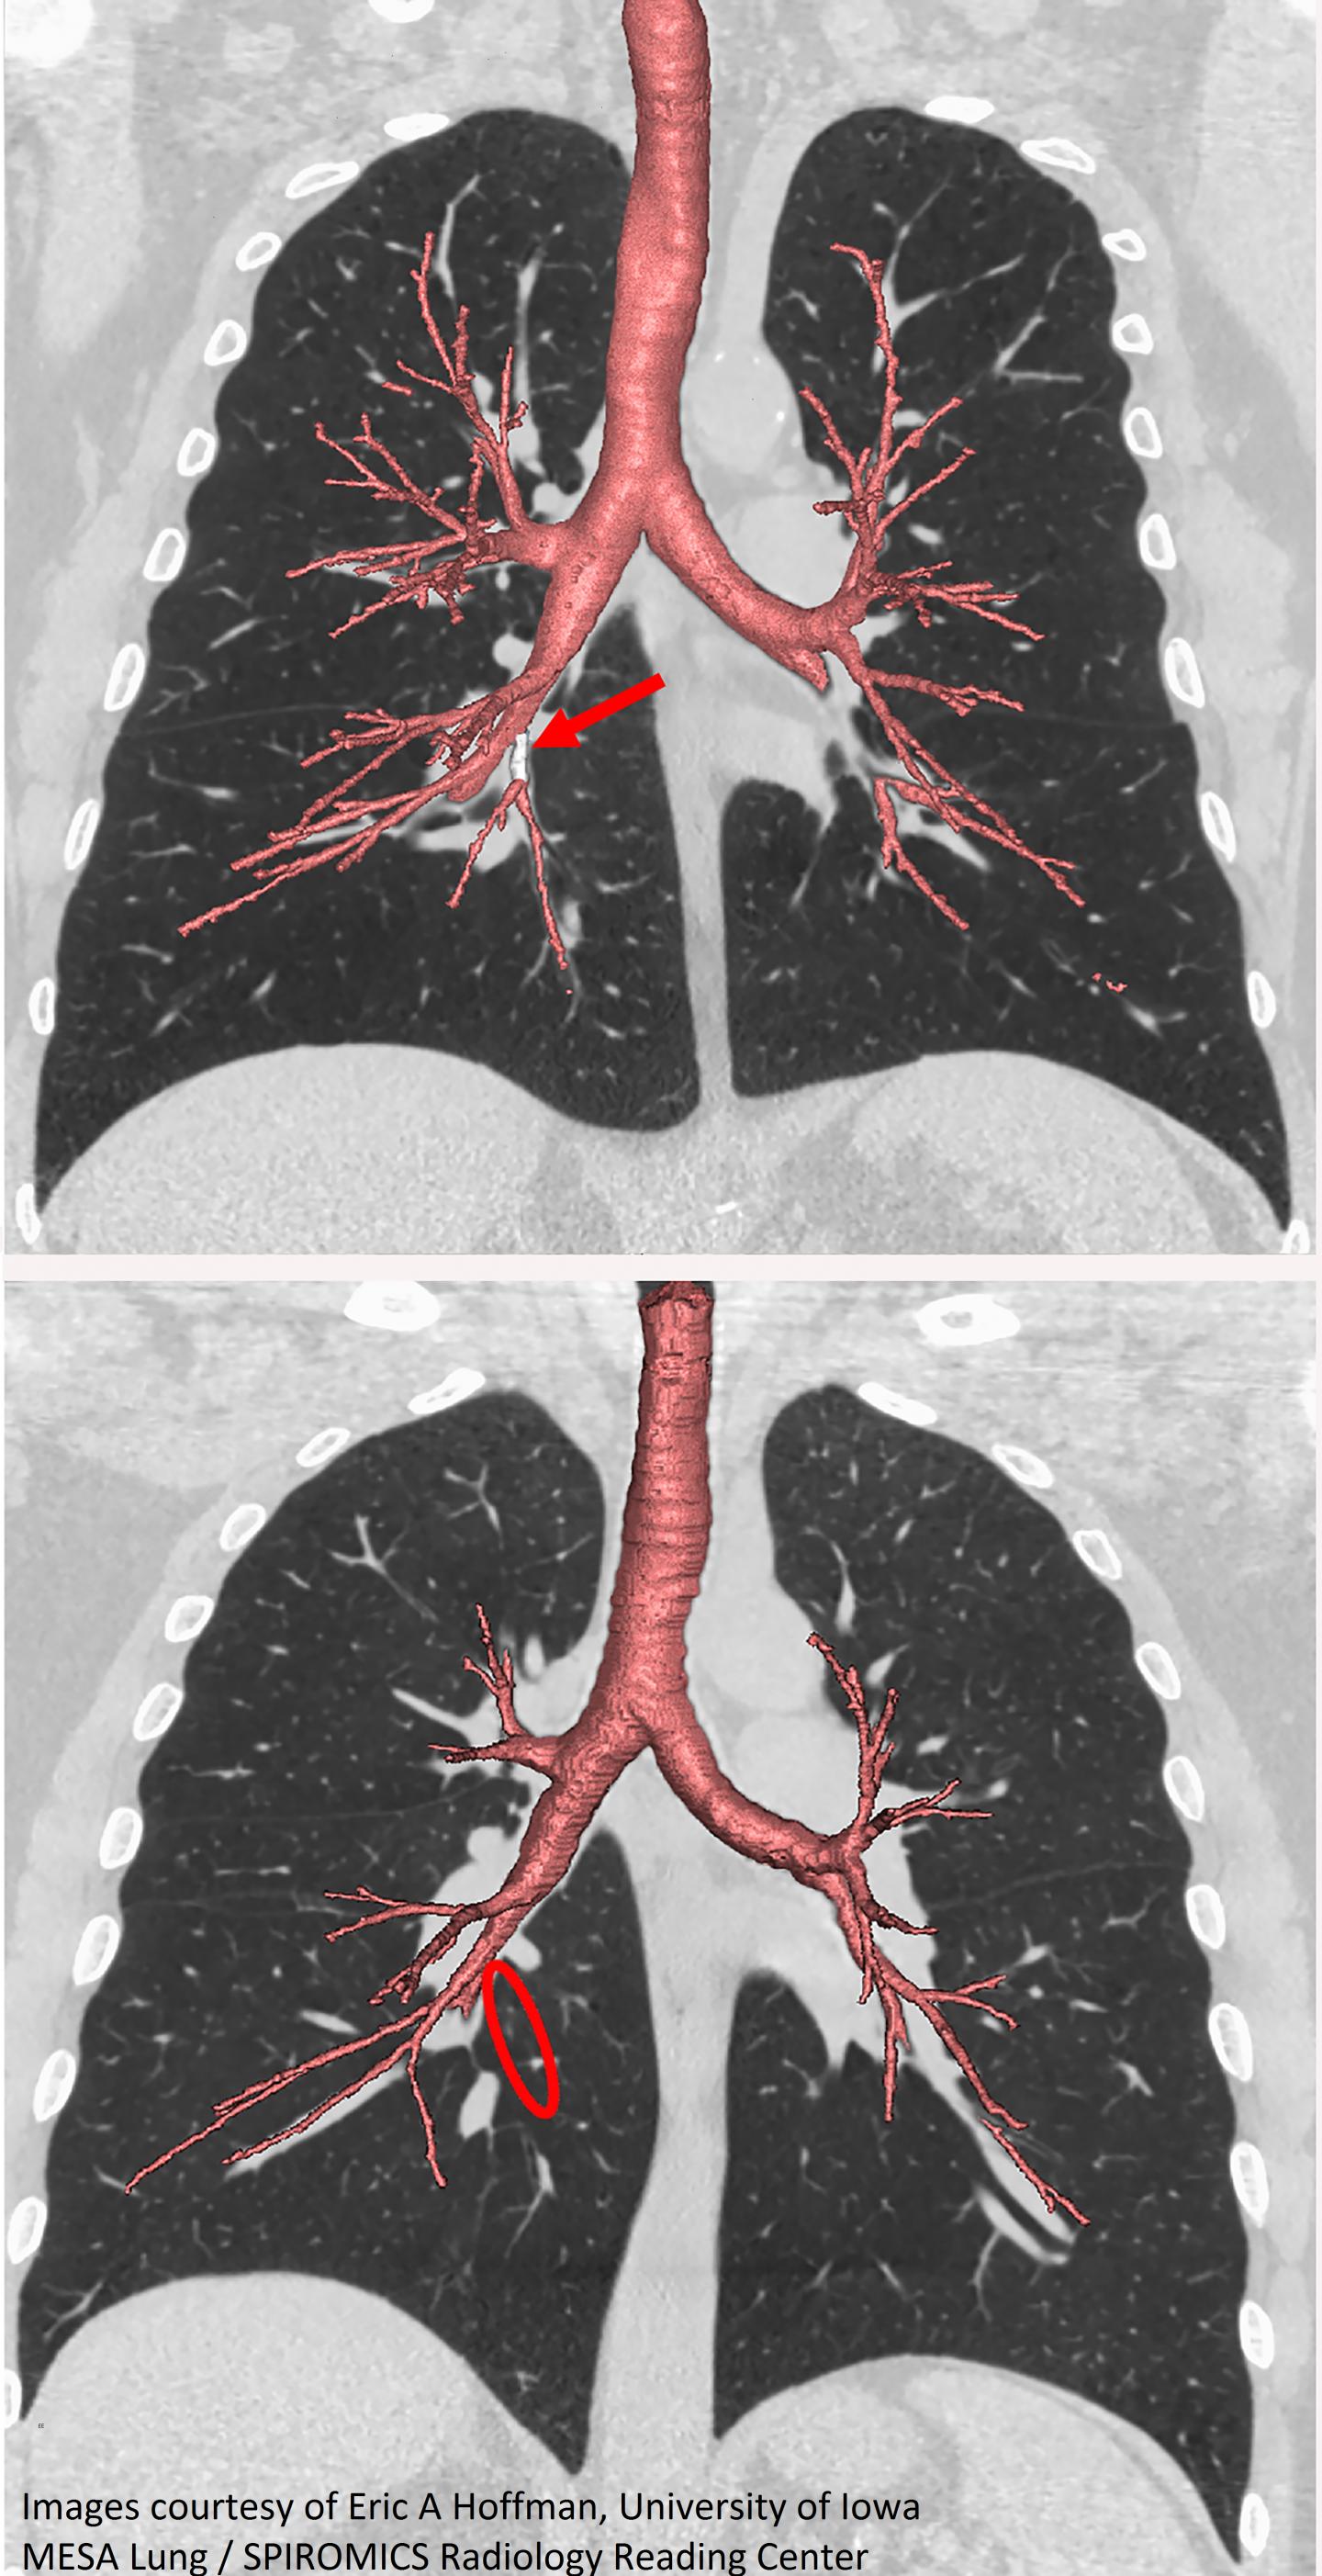 Images of the Lungs Highlighting the Airway Branches